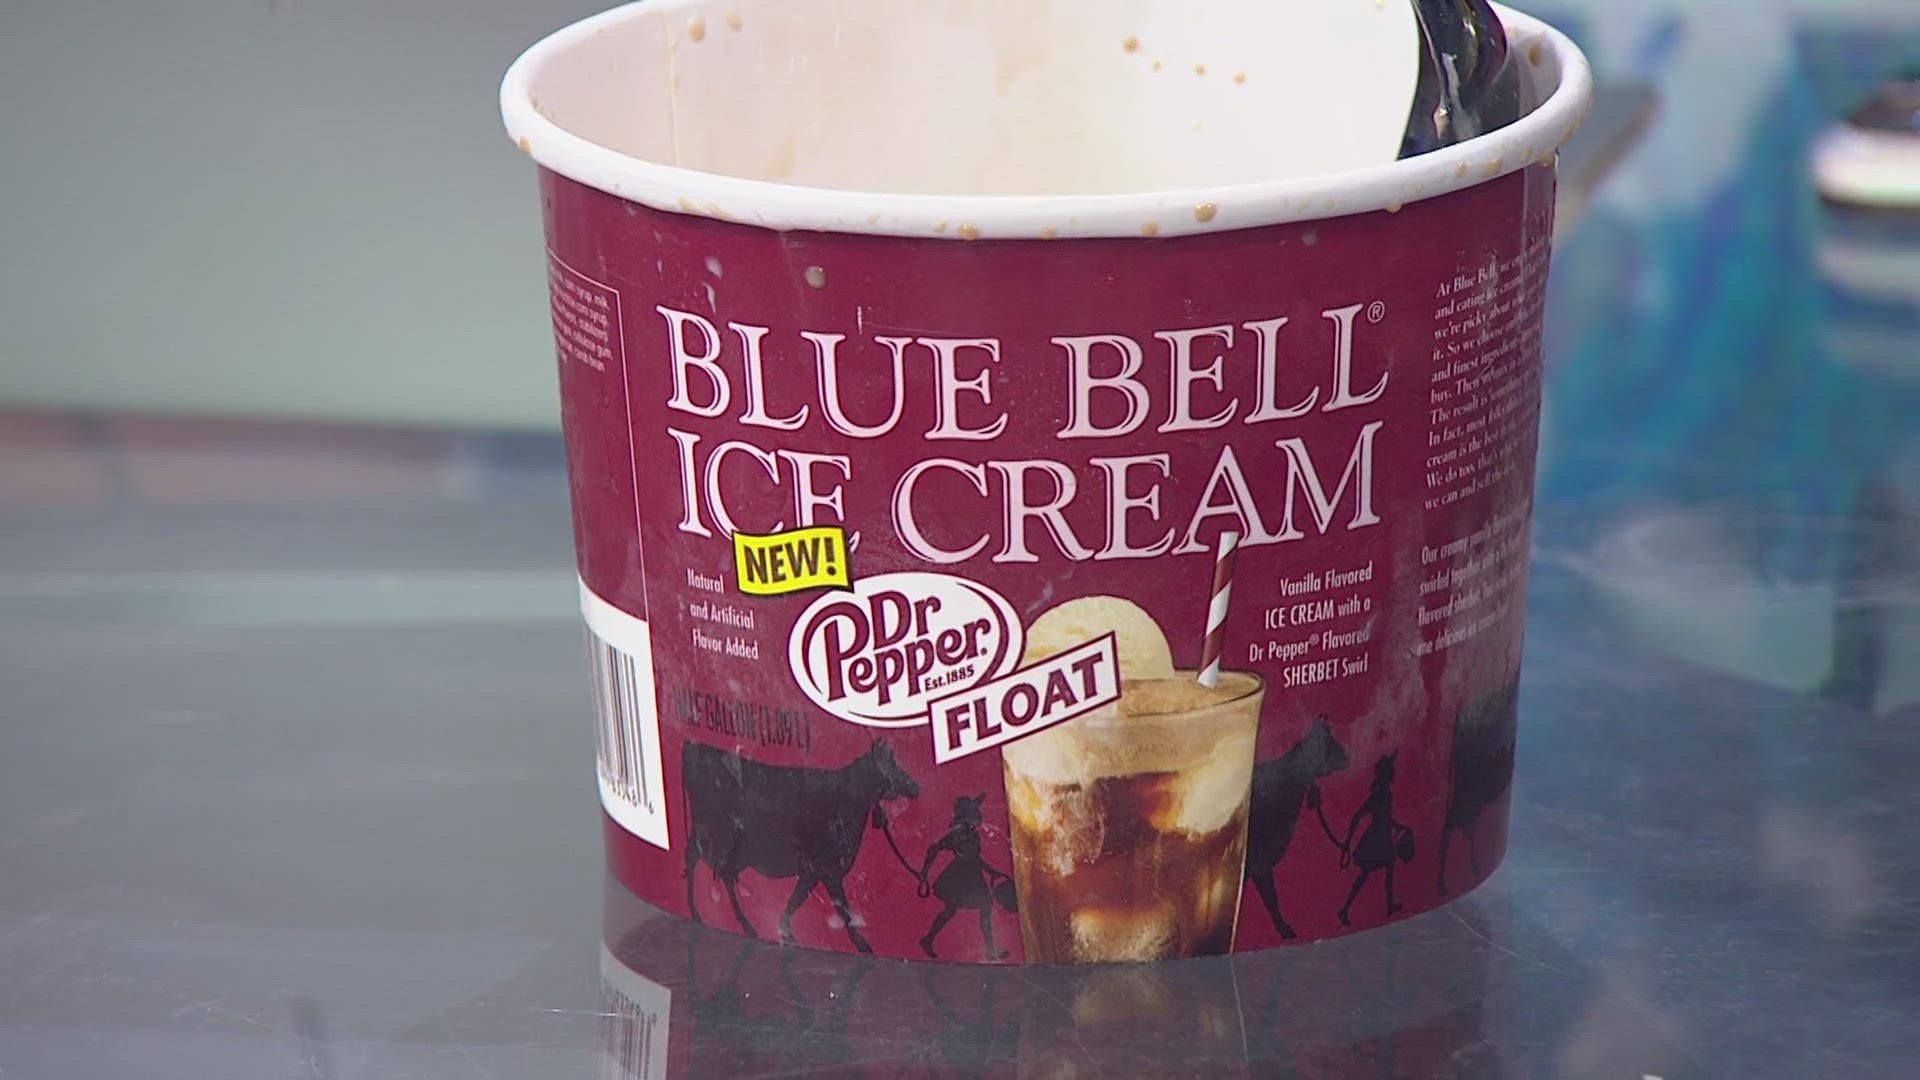 The two iconic Texas brands are teaming up for what is sure to be a fan favorite ice cream.